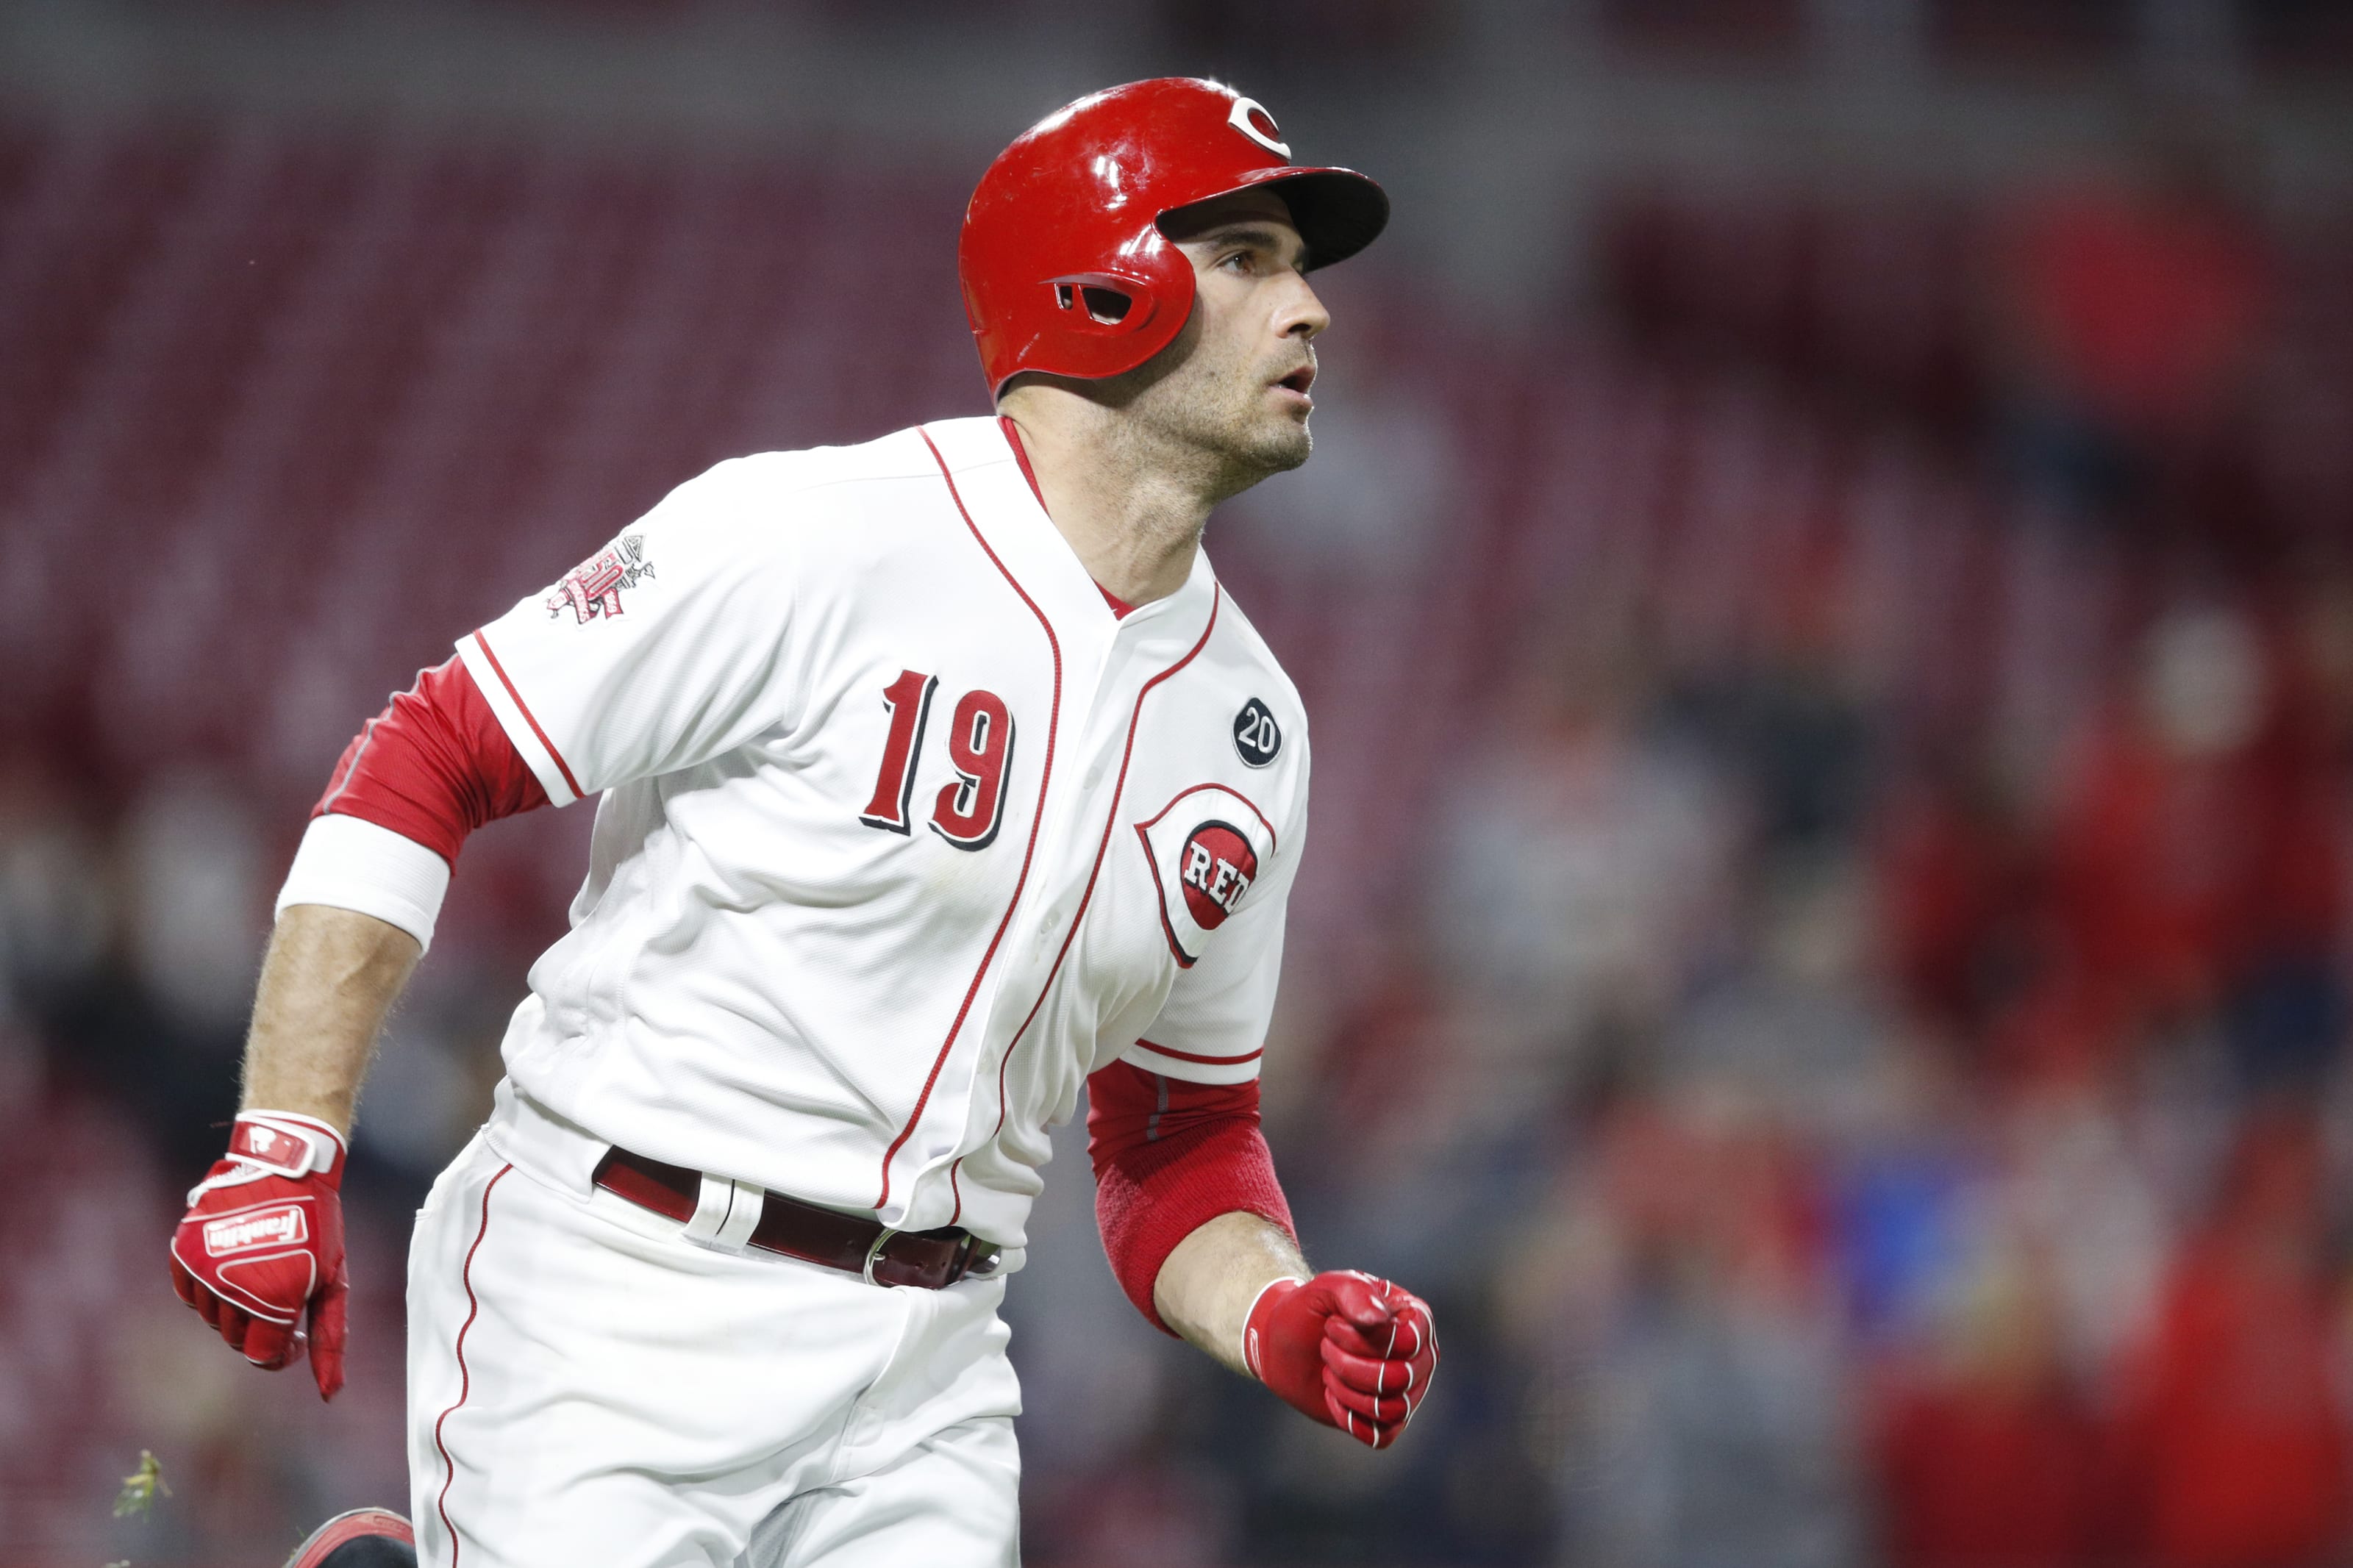 Joey Votto on Canadian baseball: 'I don't care at all